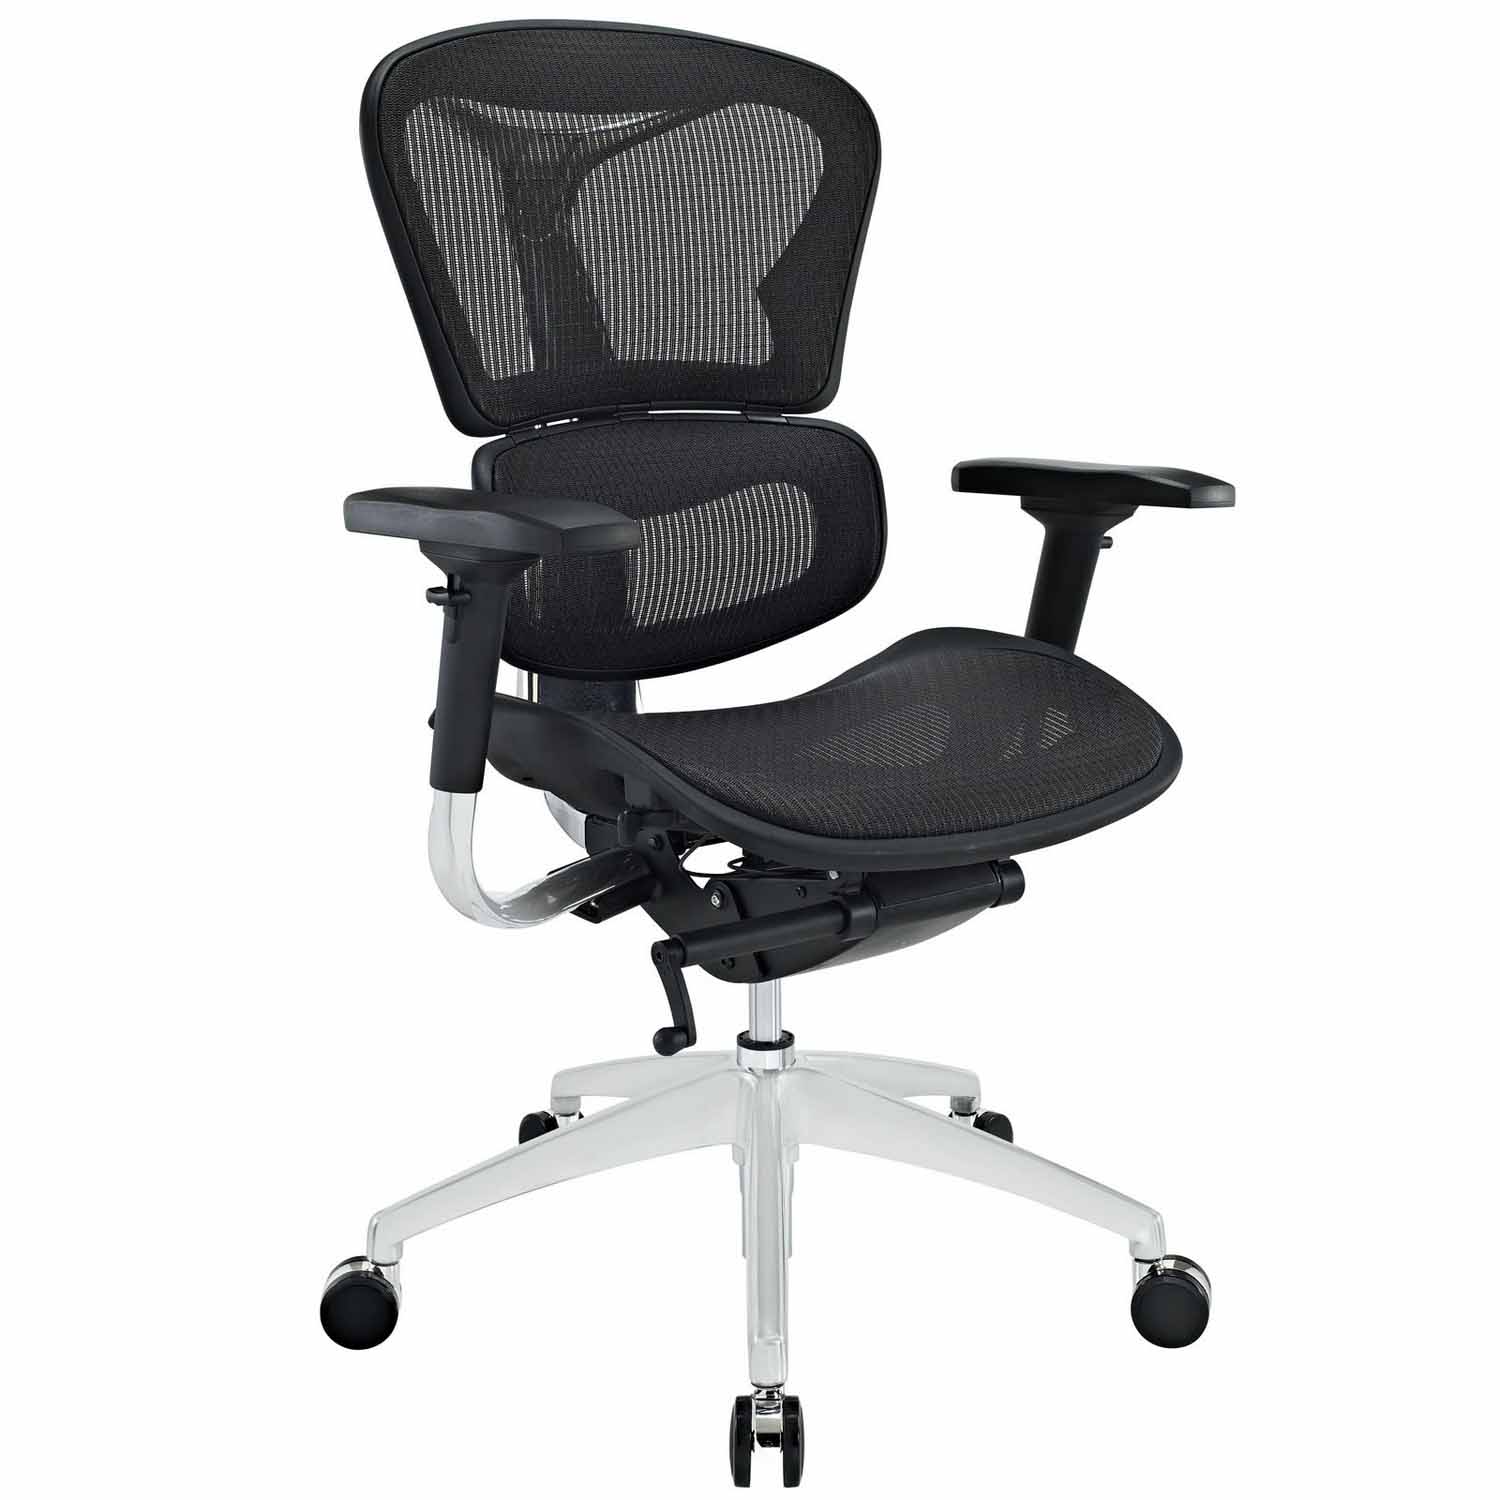 Modway Lift Mid Back Office Chair - Black